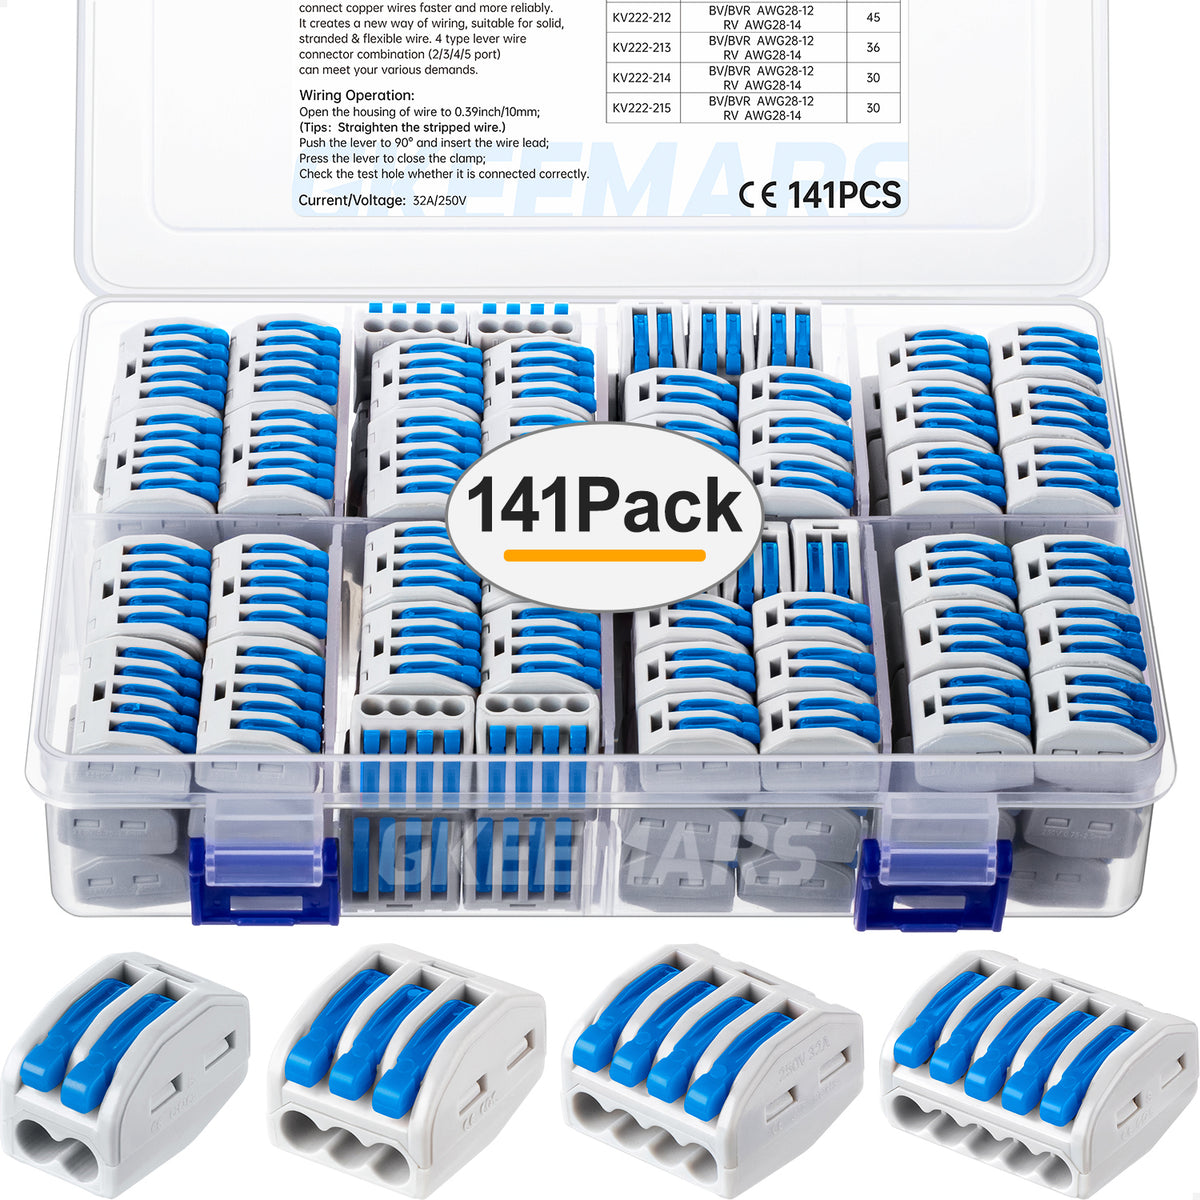 3 Port 5 Port for Quick Connection Electrical Wire Connectors 70Pcs Lever Wire Connector Nuts 4 Port Compact Splicing Wire Connector Assortment 2 Port 